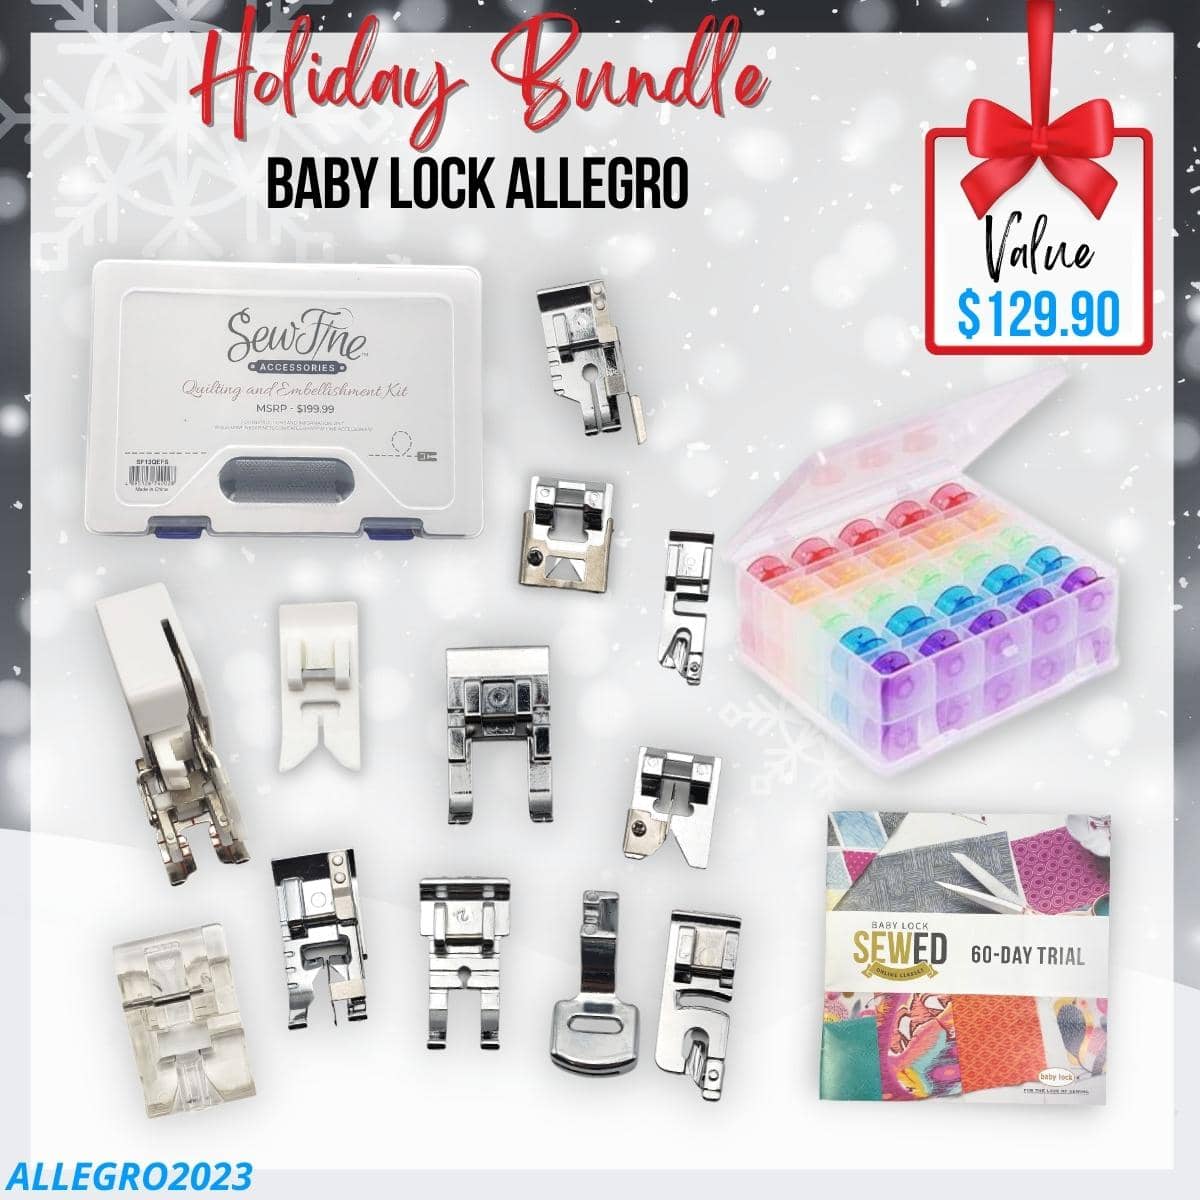 Baby Lock Allegro Bundle for holiday sale